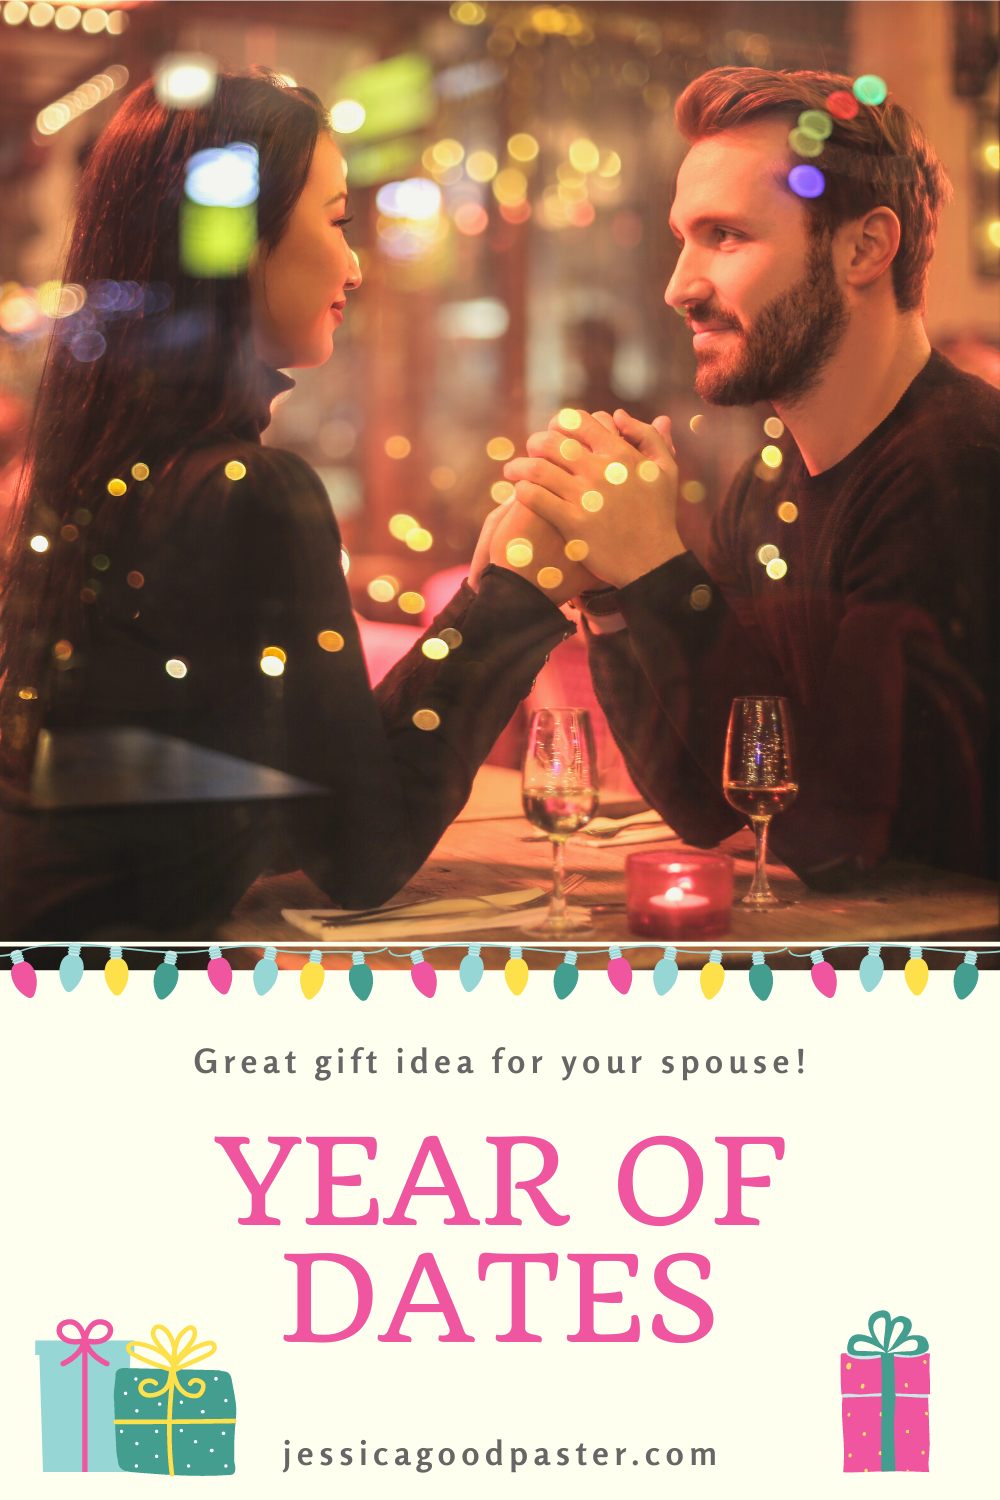 Make A Year of Dates the Best Gift Ever | Time together is the best way to celebrate your husband, wife, boyfriend, or girlfriend! A year of preplanned dates is the gift that keeps on giving. Includes 12 fun date night ideas for any budget. #datenight #dateideas #christmas #valentinesday #giftideas #yearofdates #anniversary